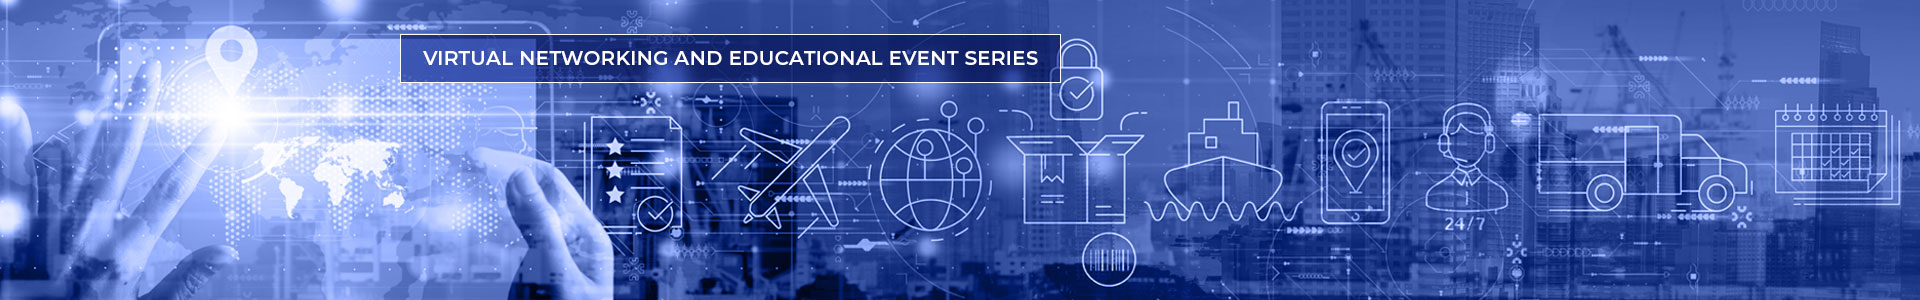 Evaluating Biopharma - Supply Chain Challenges, Online Event